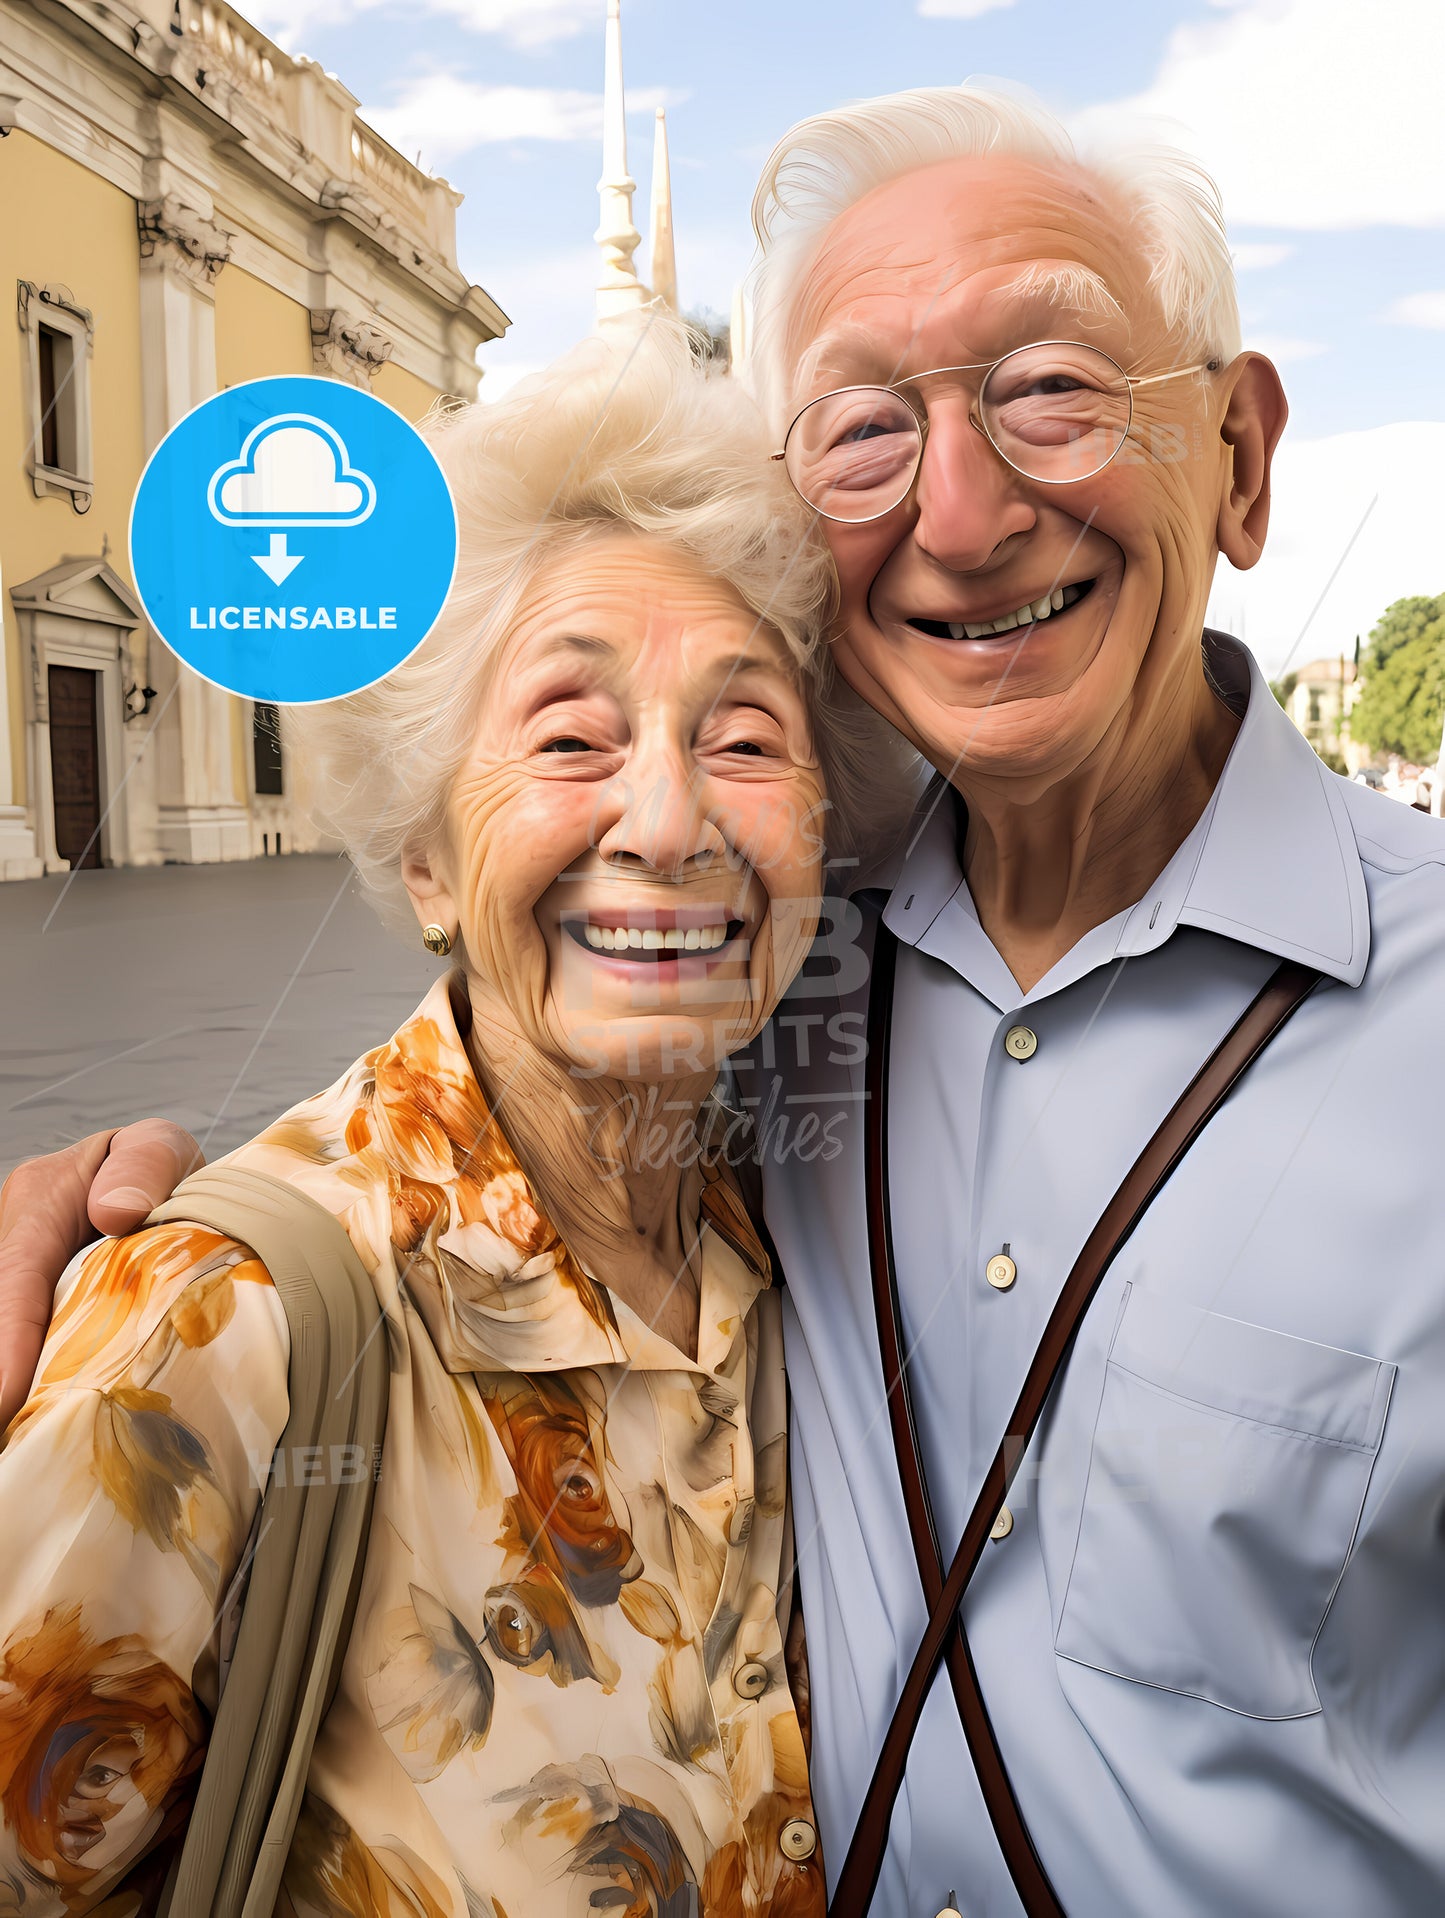 Smiling Elderly Couple Taking A Selfie, A Man And Woman Smiling For A Picture